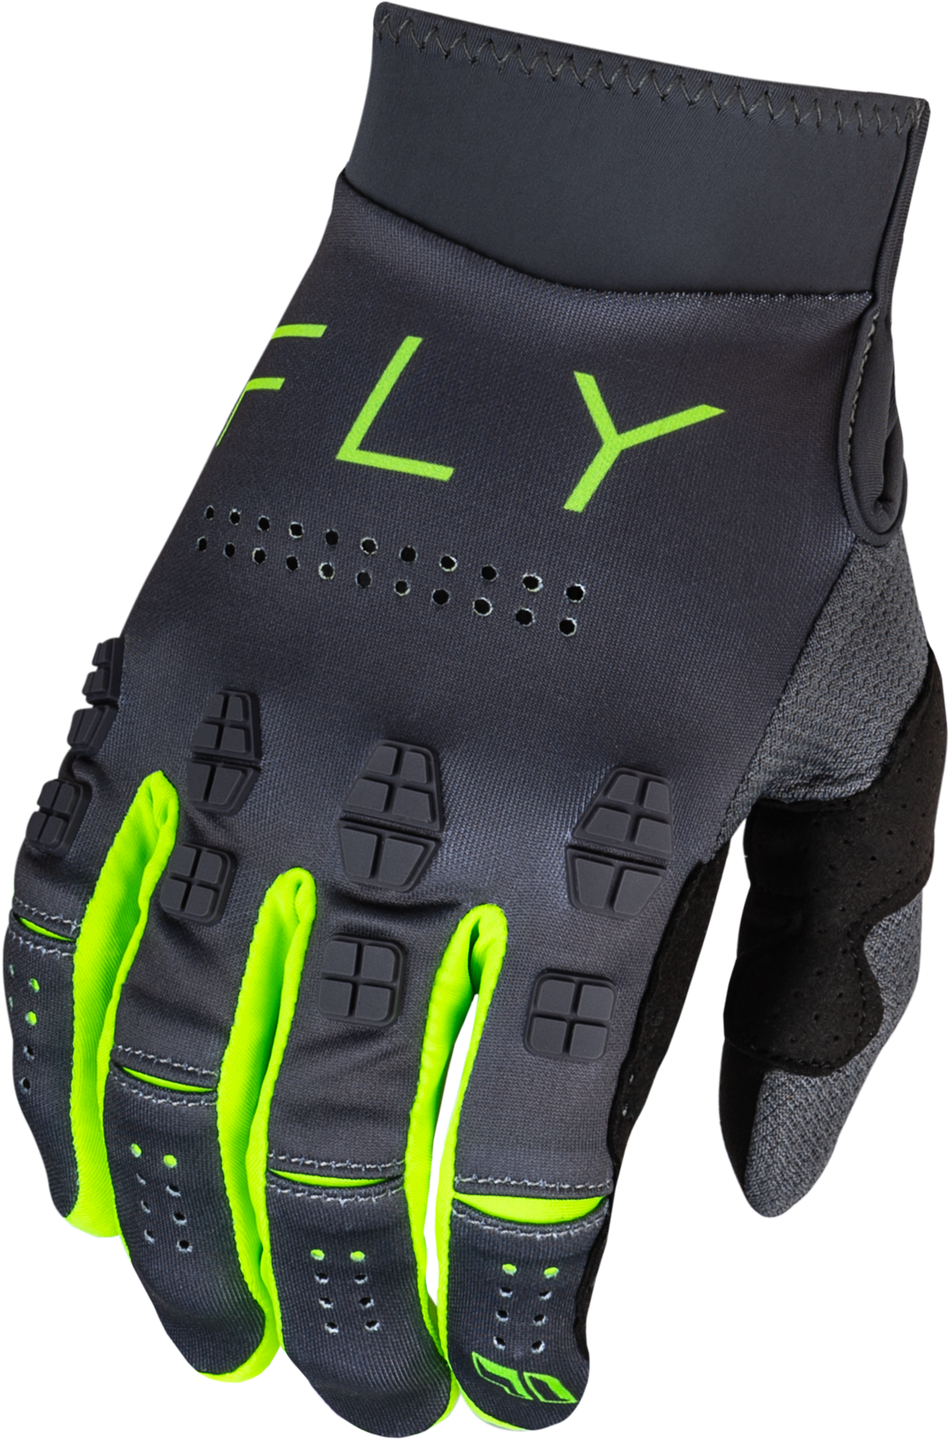 FLY RACING Evolution Dst Gloves Charcoal/Neon Green Lg 377-111L